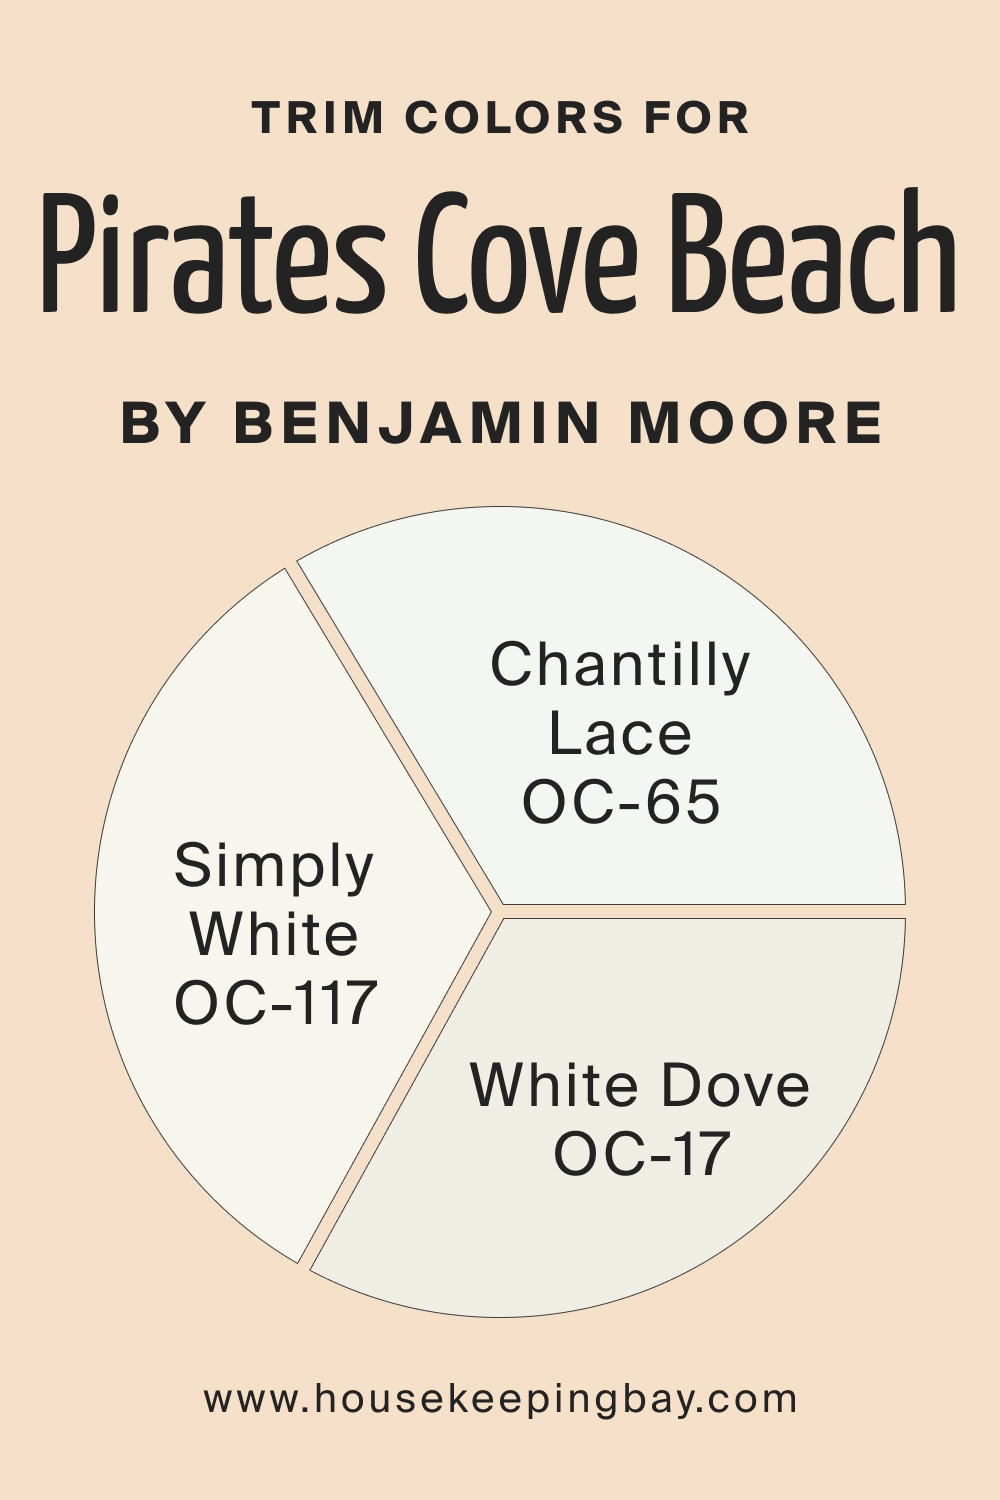 Trim Colors for Pirates Cove Beach OC 80 by Benjamin Moore